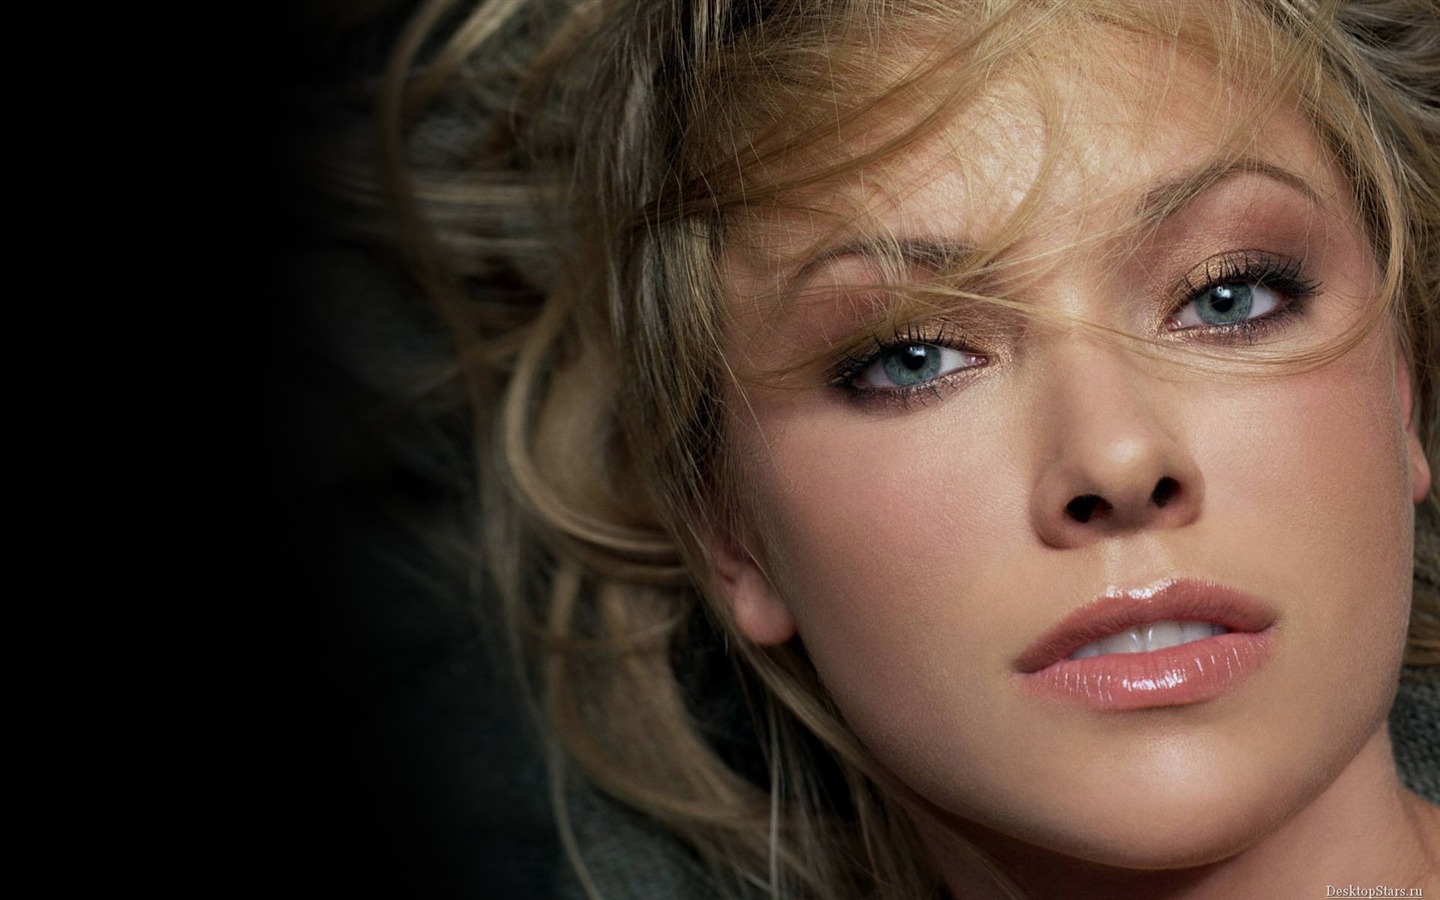 Kristanna Loken #004 - 1440x900 Wallpapers Pictures Photos Images